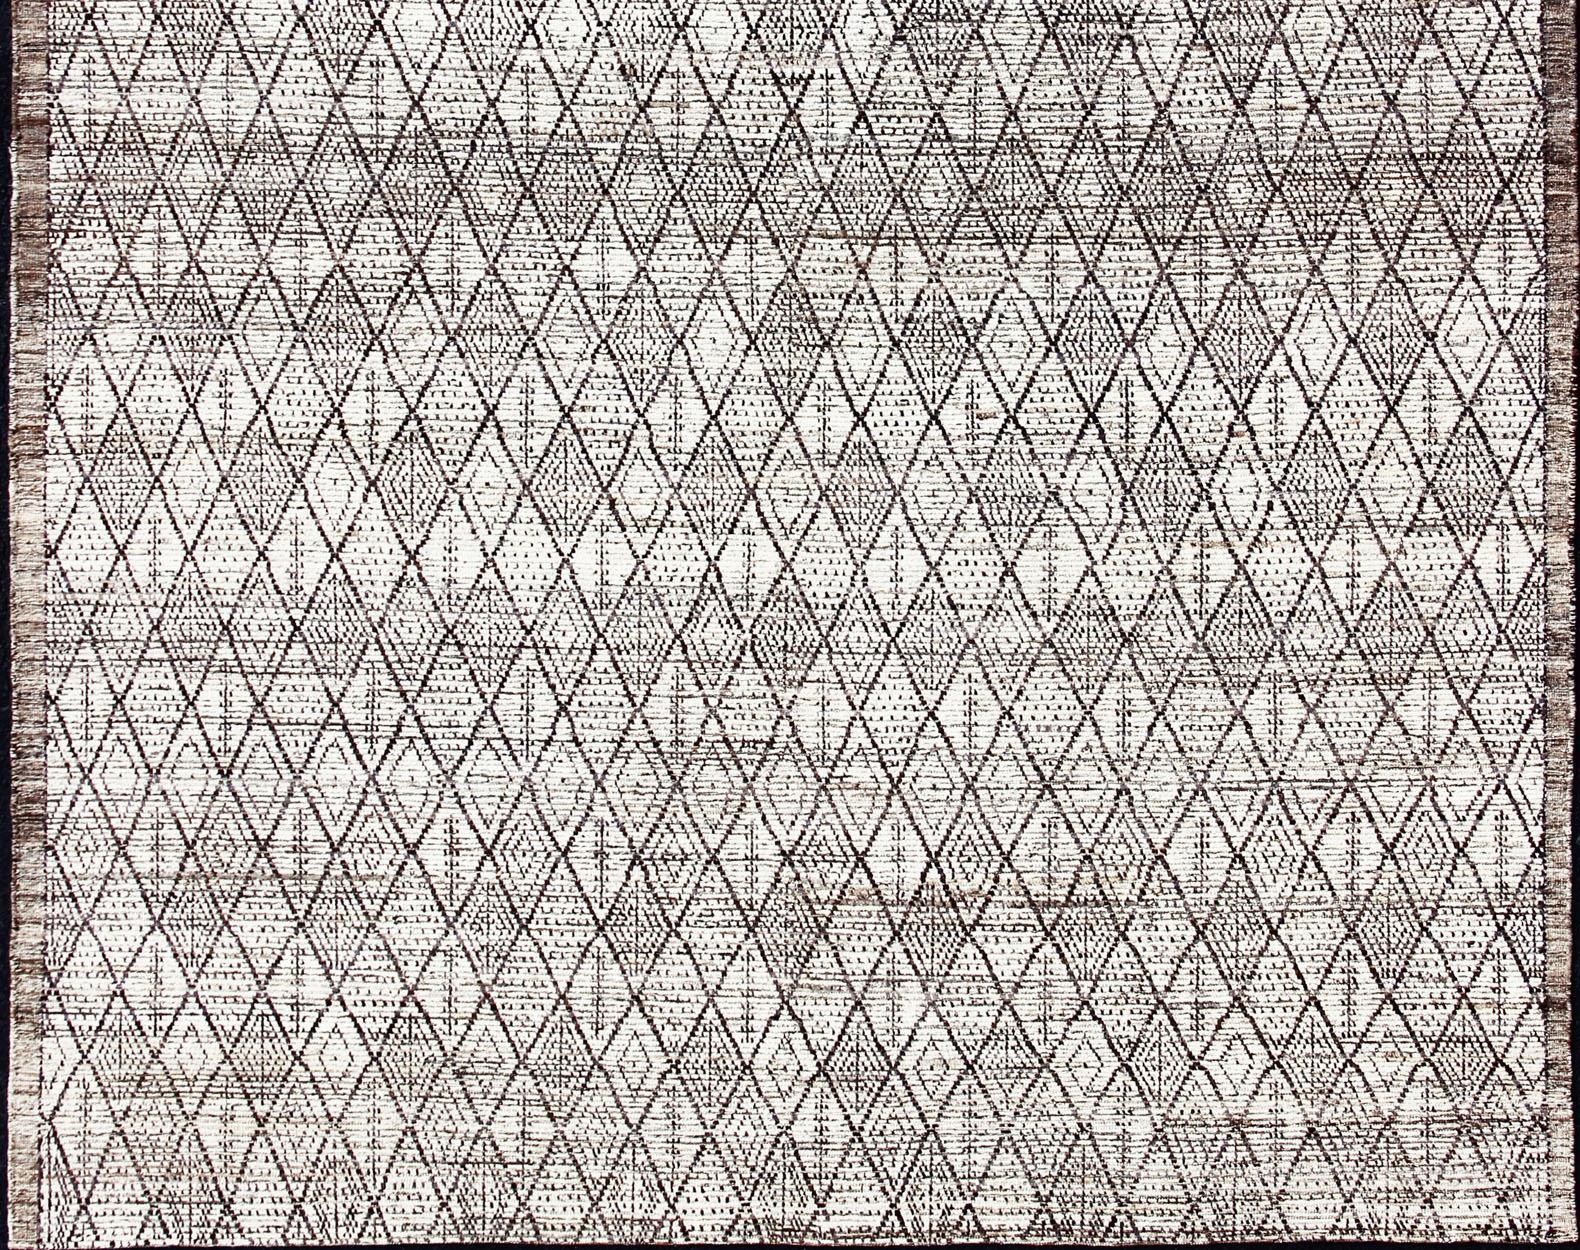 White, taupe and brown rug with modern casual design and natural wool, rug AFG-33316, country of origin / type: Afghanistan / Modern,

This New Creation of classic Moroccan design, this modern casual natured rug features geometrical tribal motif